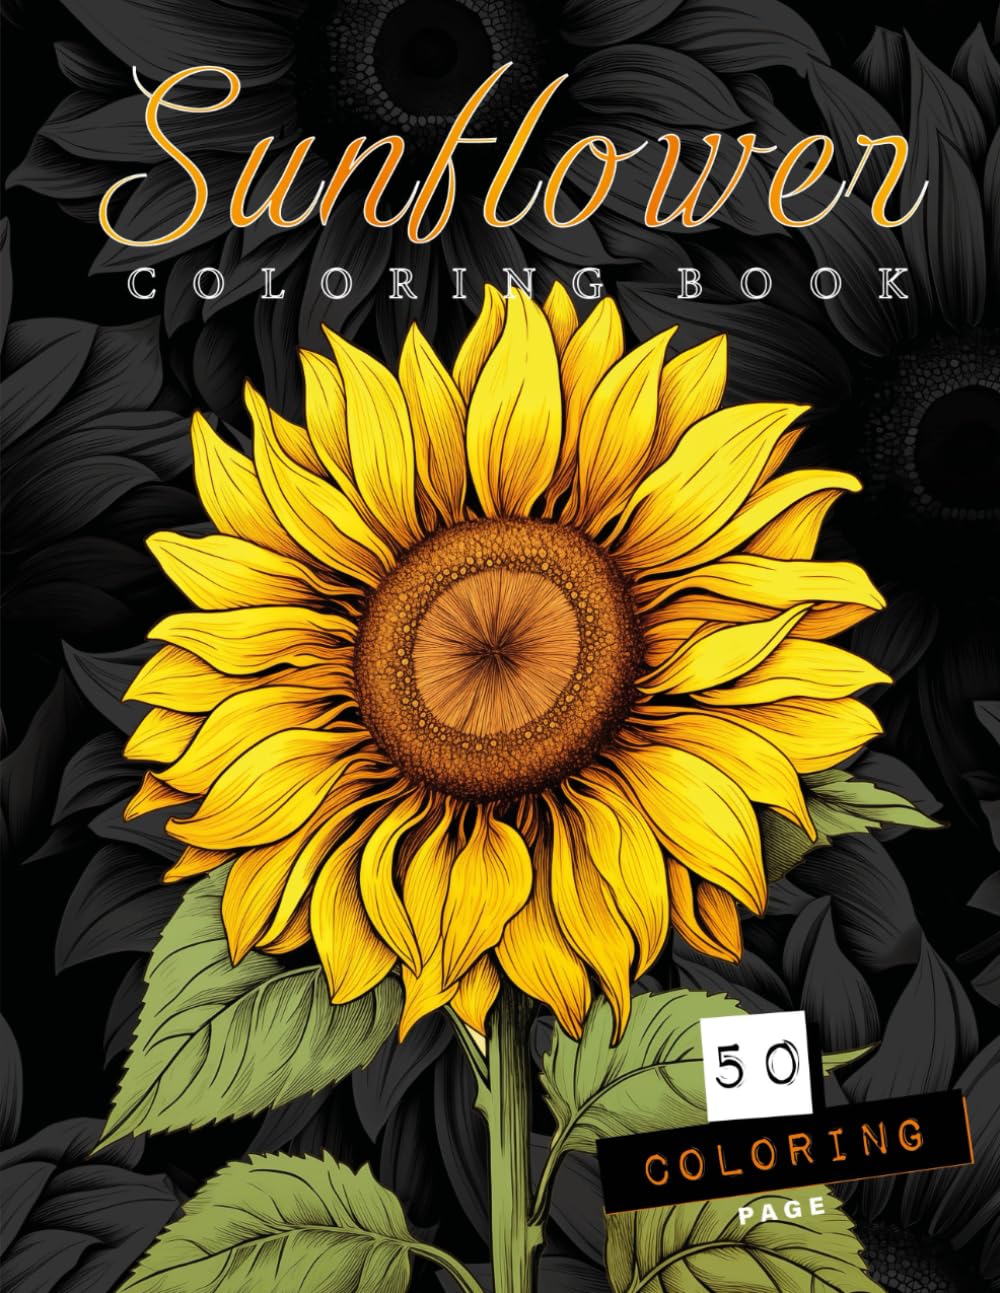 Sunflower Coloring Book: Creative Coloring Book: 50 Detailed Designs to Explore the Beauty of Sunflower Fields - Relaxation, Creativity, and Artistic Joy! (Italian Edition)